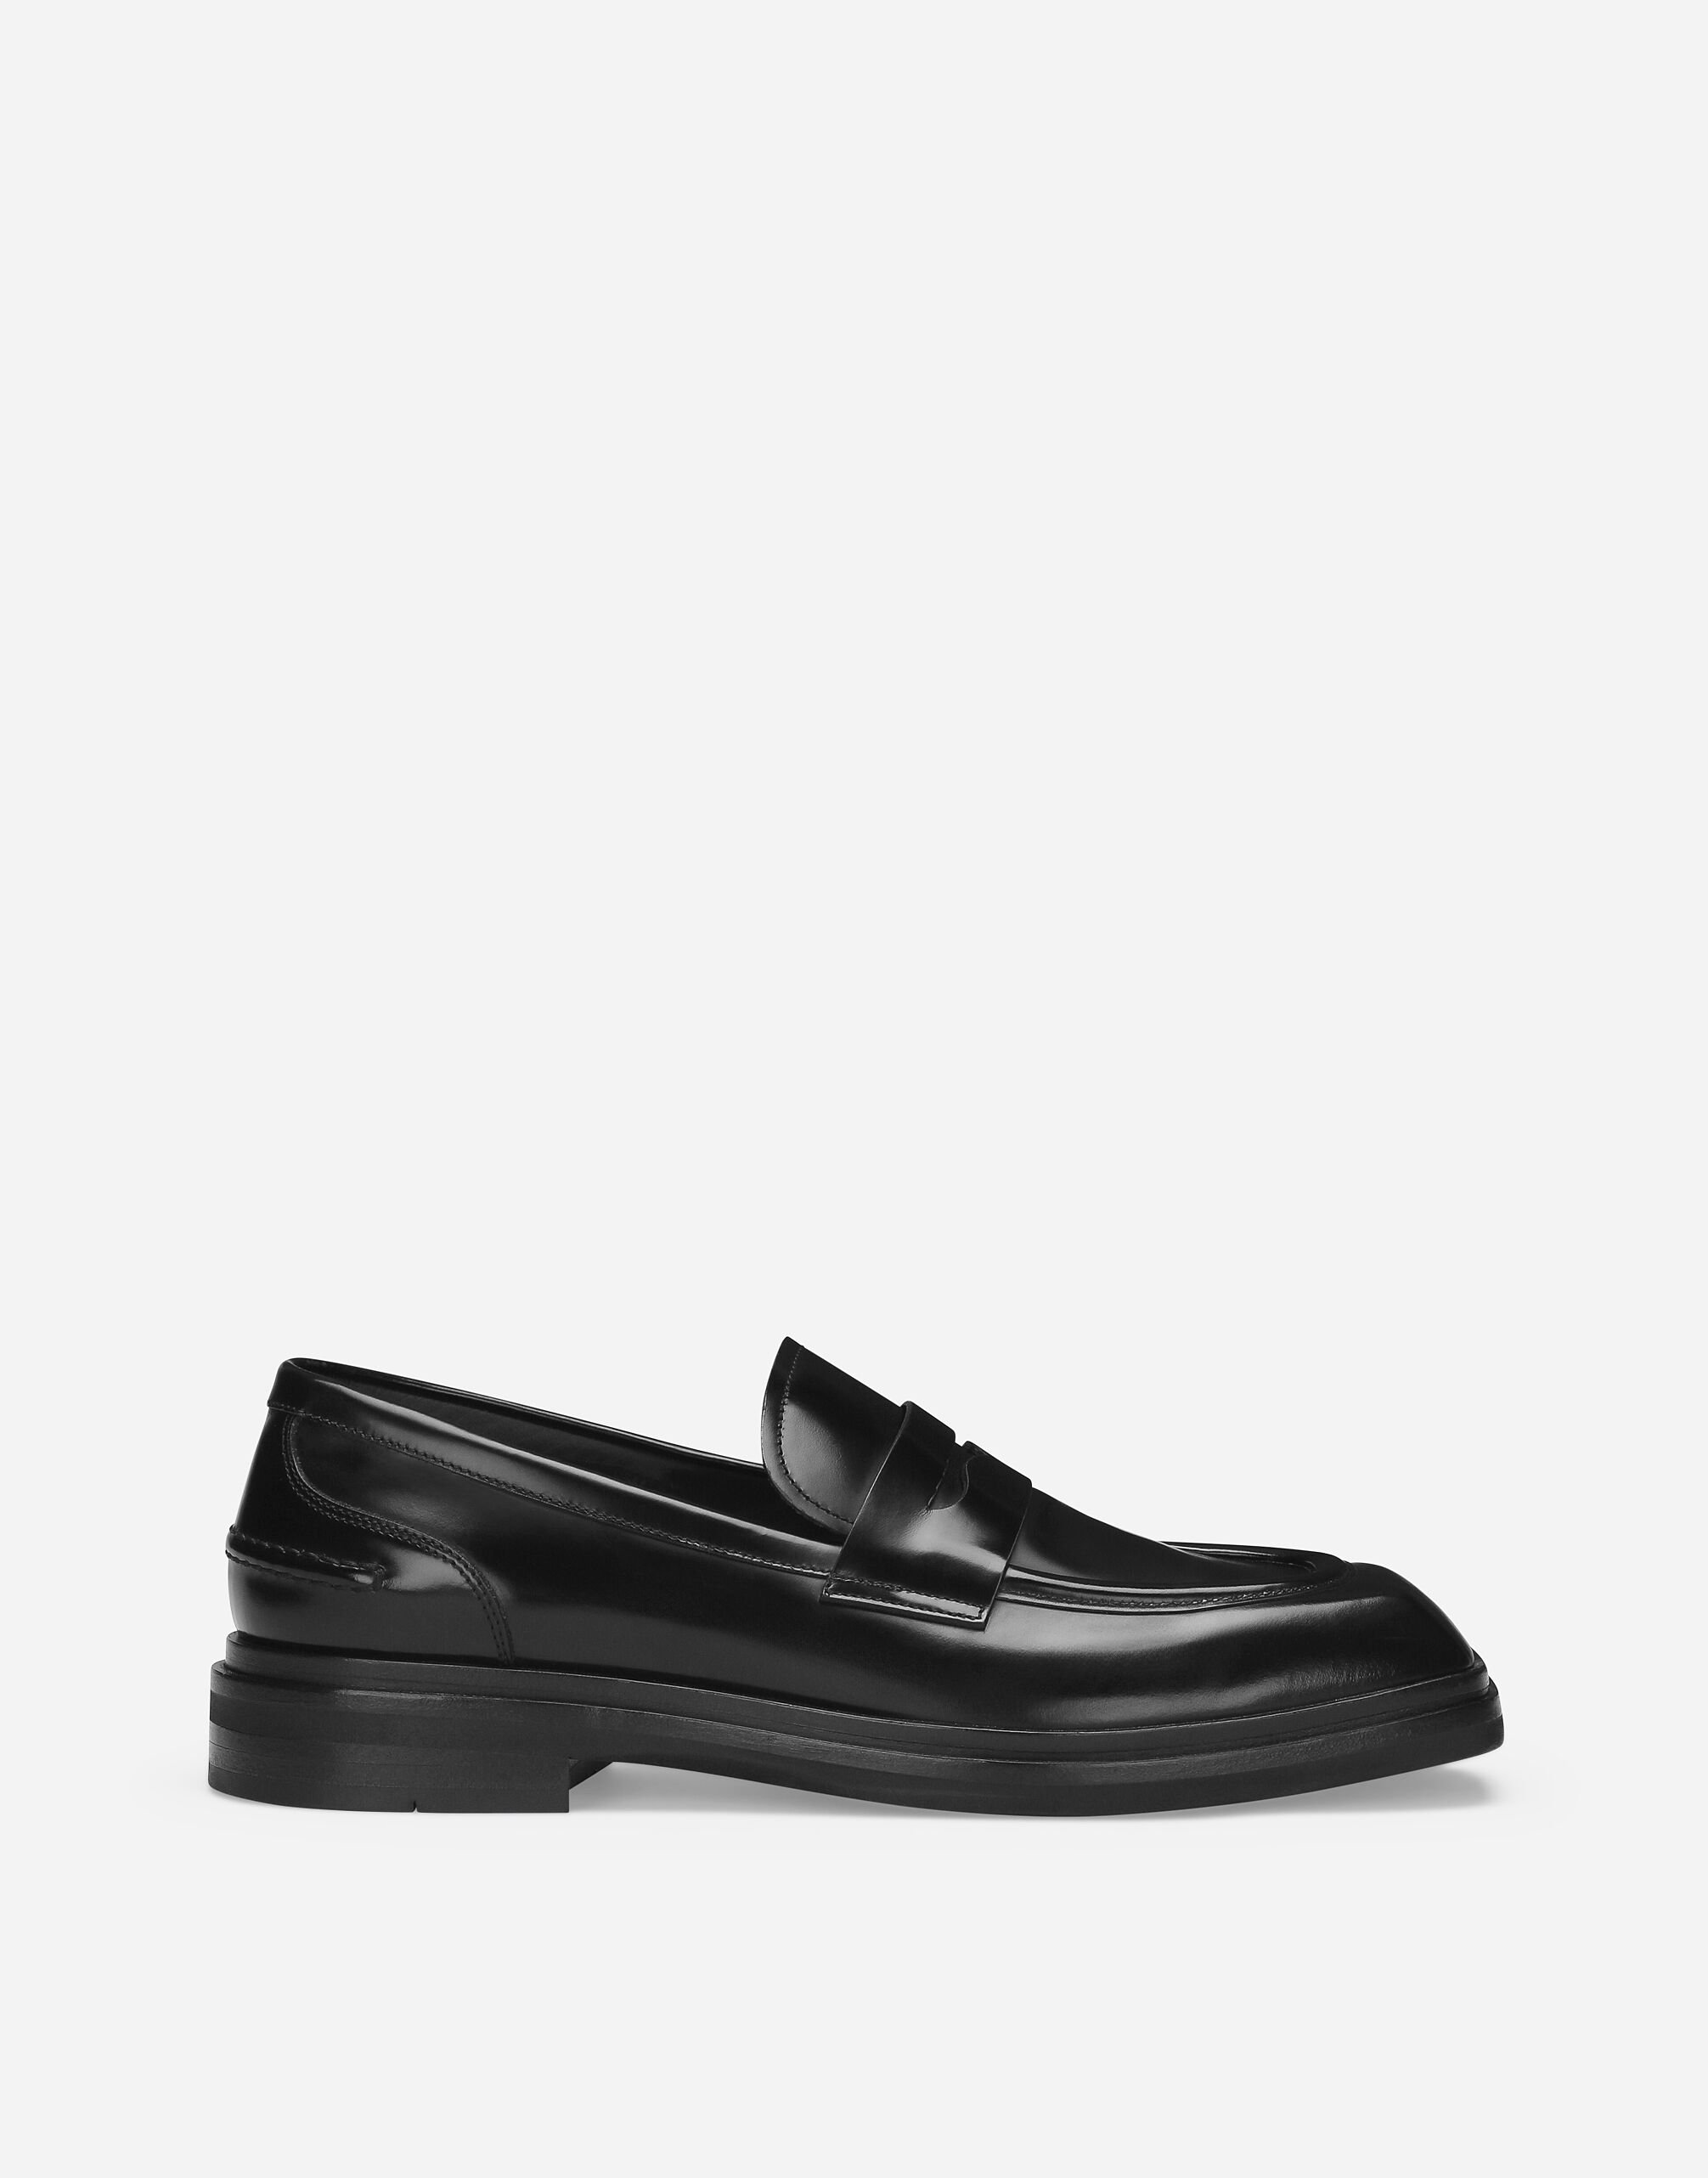 Men's shoes: sneakers, boots, loafers | Dolce&Gabbana®